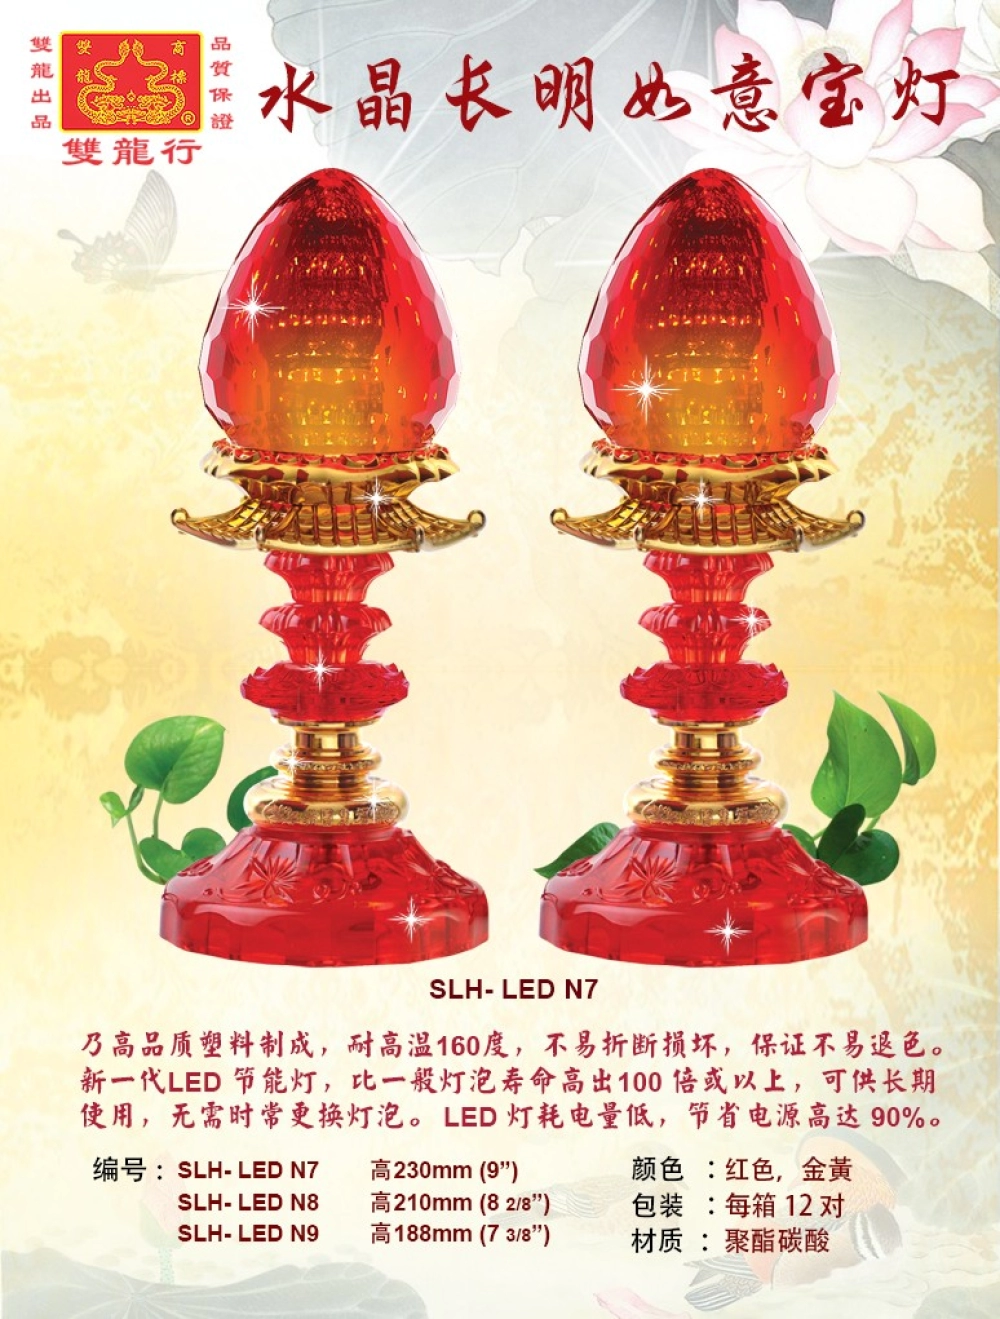 Peach Shape Praying Table Lamps  :  Crystal Continuous Light, Wish Fulfilling Treasure Lamps